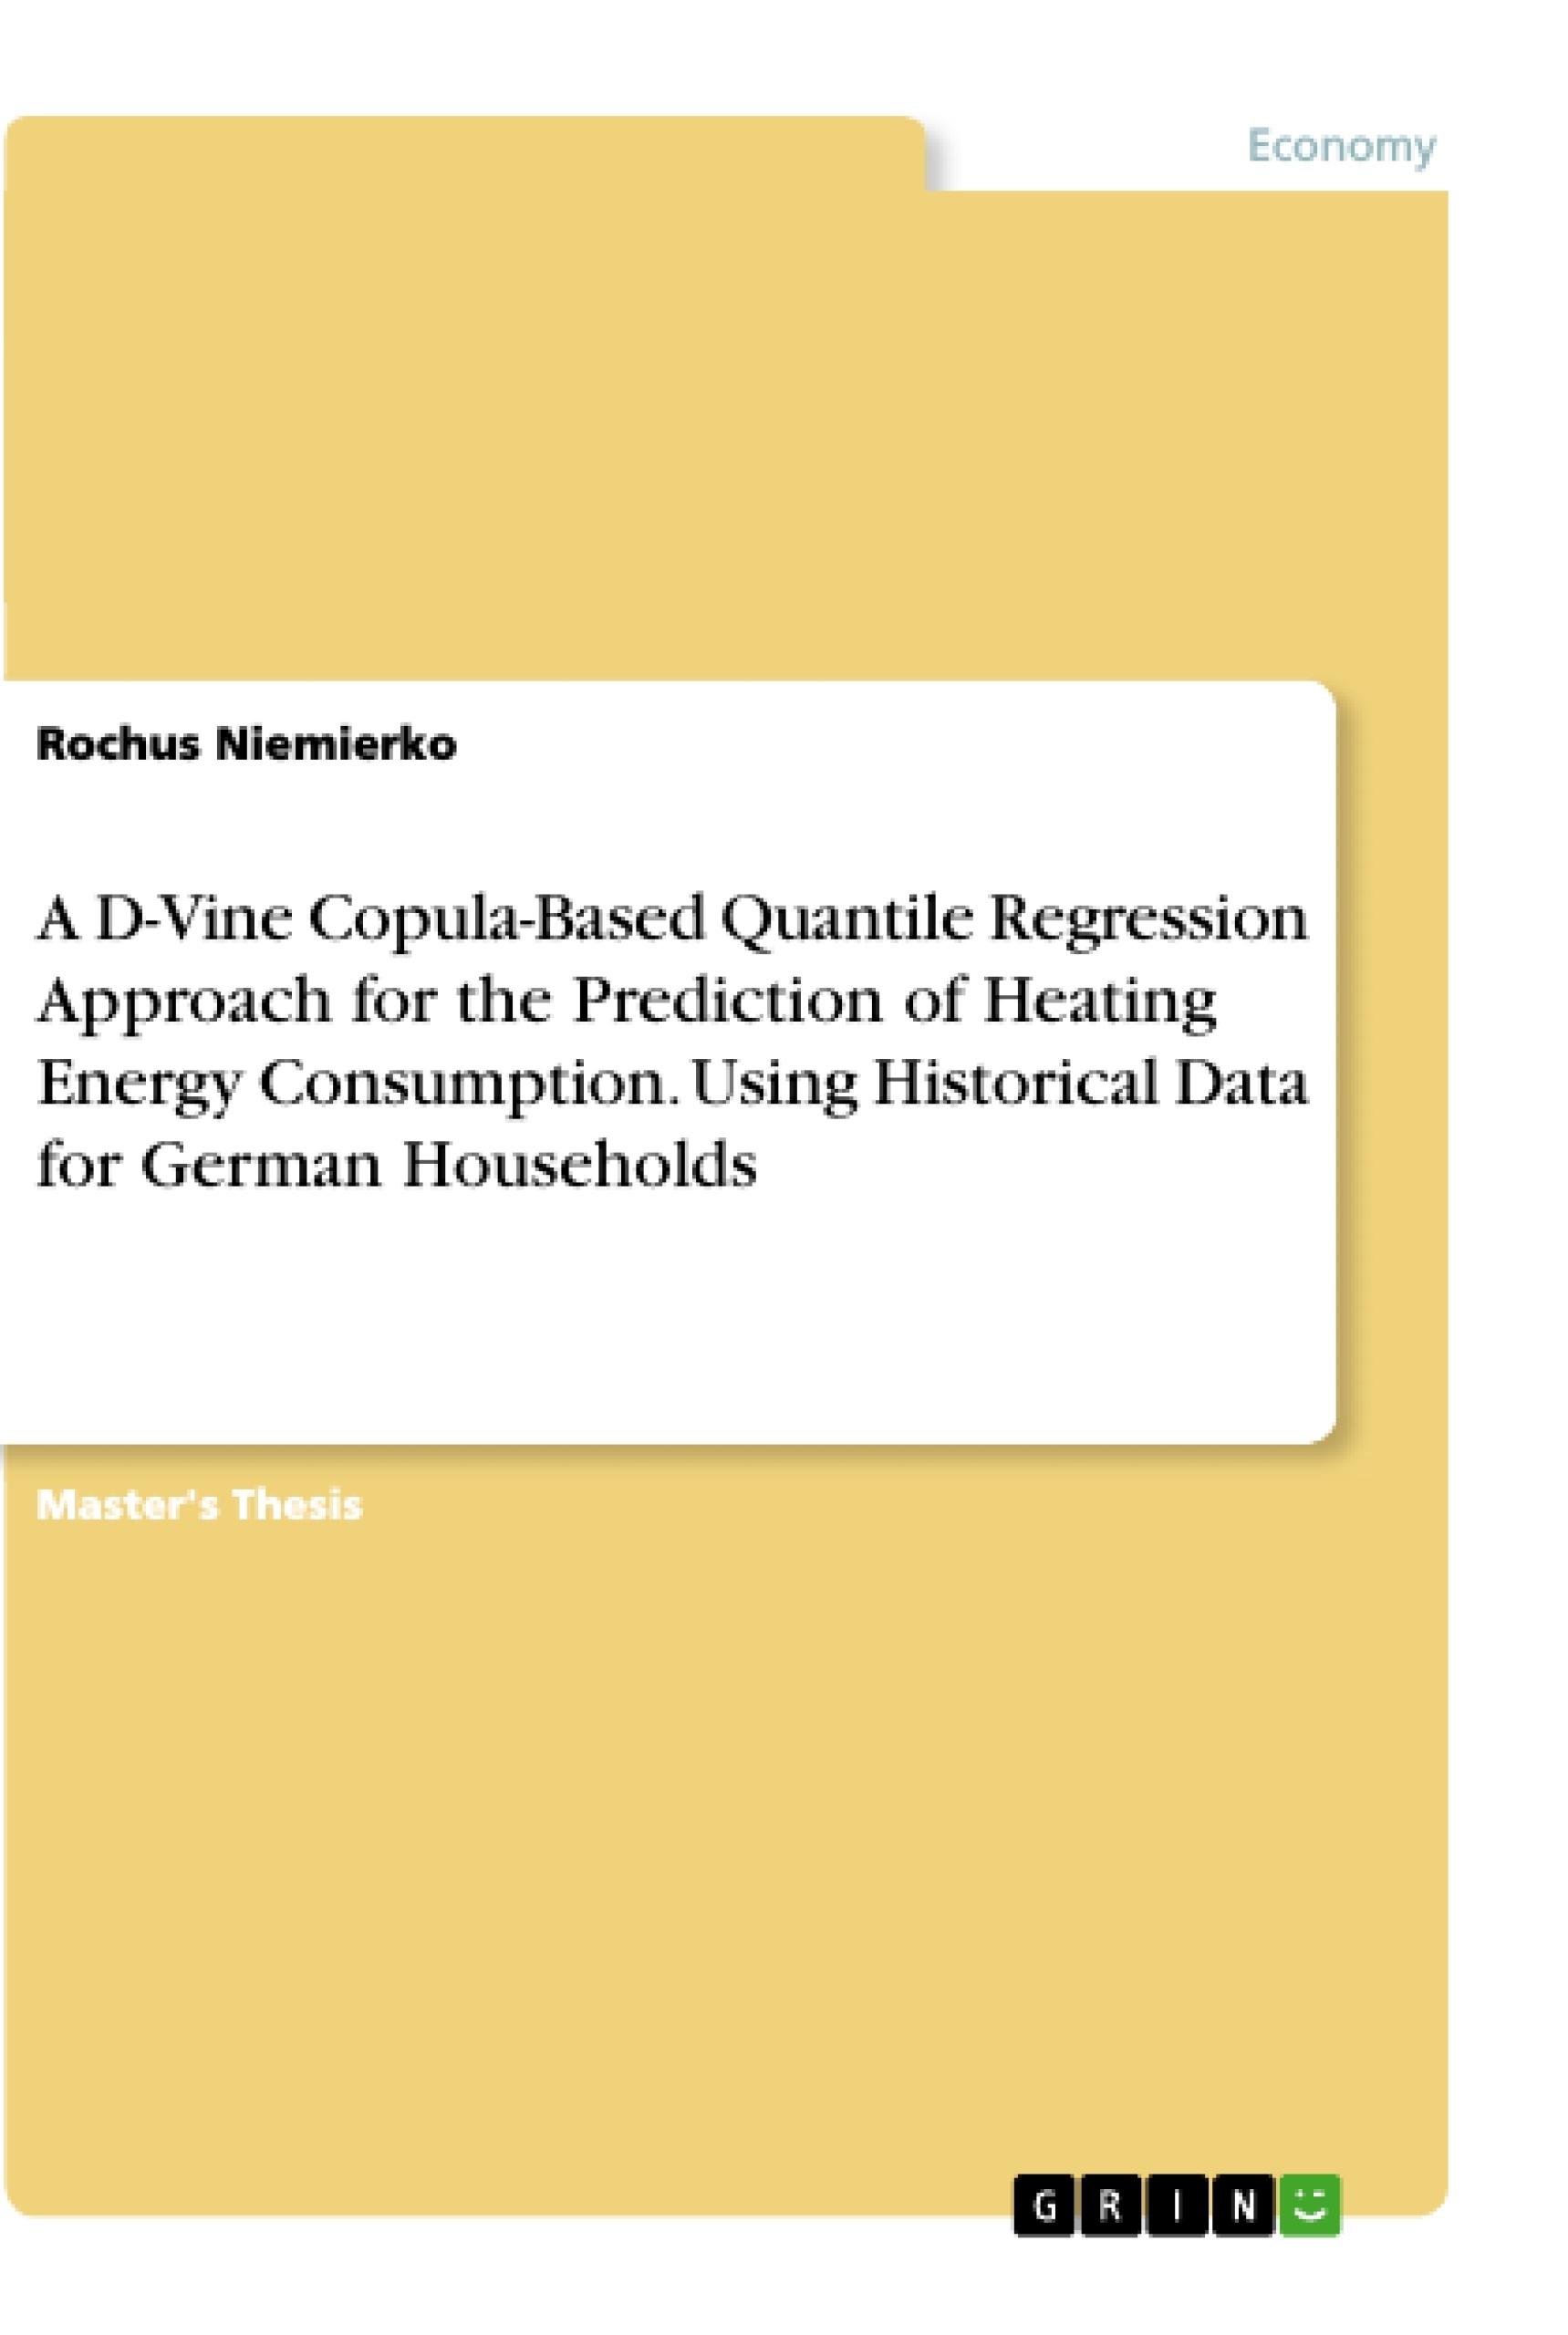 Title: A D-Vine Copula-Based Quantile Regression Approach for the Prediction of Heating Energy Consumption. Using Historical Data for German Households